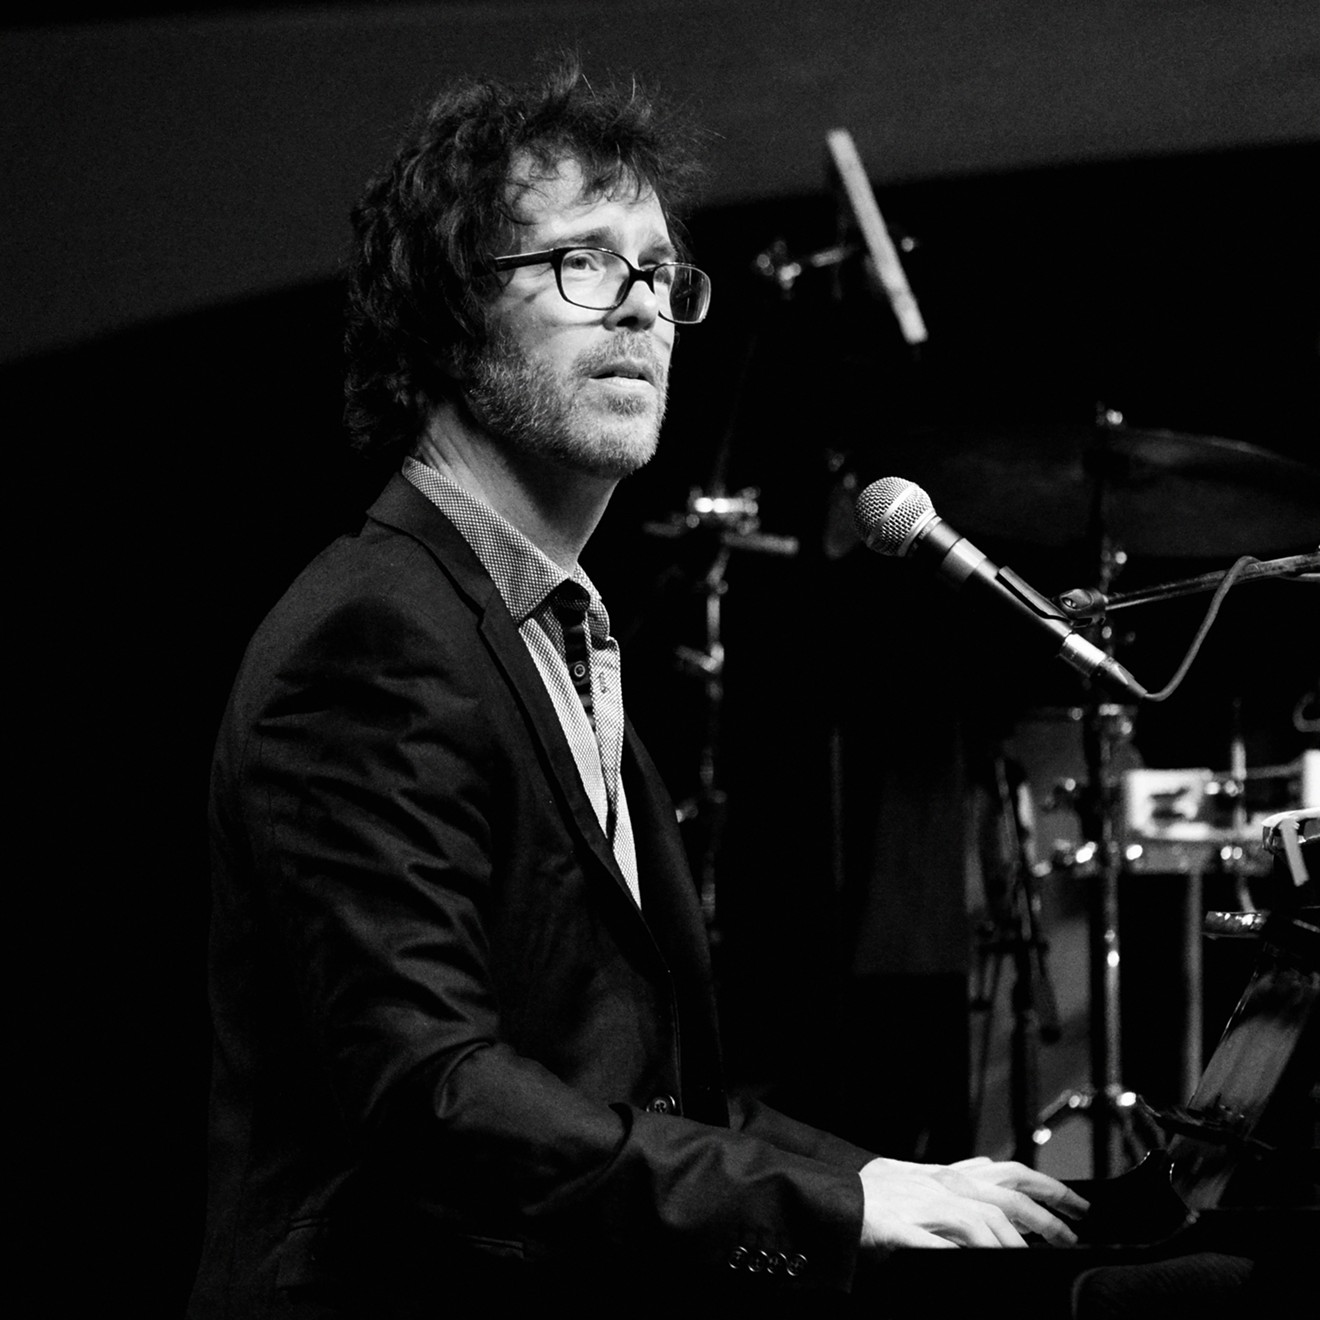 Ben Folds performed at Bass Performance Hall.